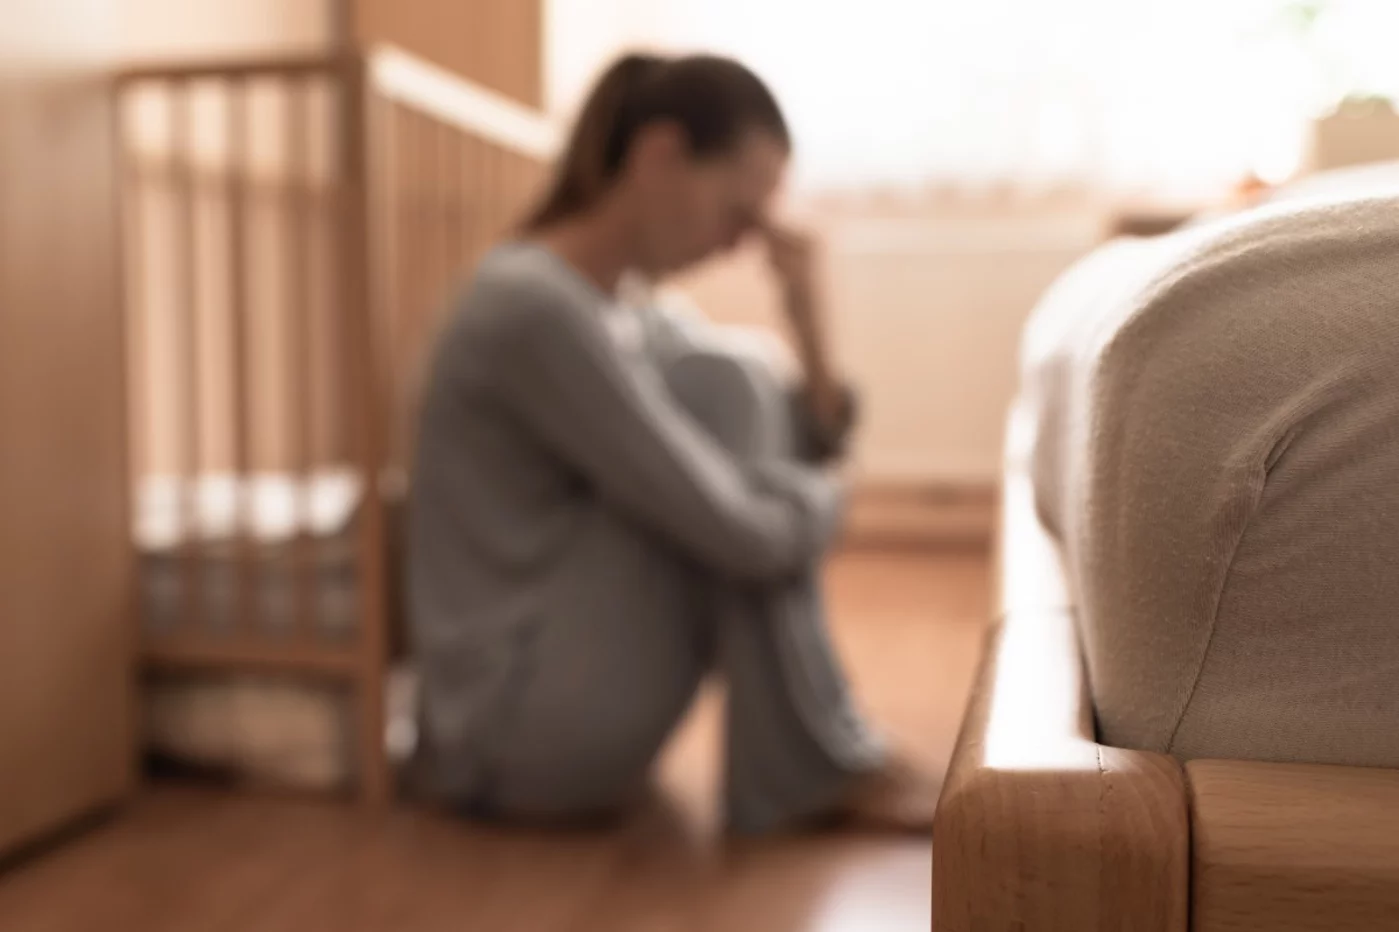 In postpartum depression, women experience sadness, guilt, worthlessness, and even, in severe cases, thoughts of harming themselves or their baby.